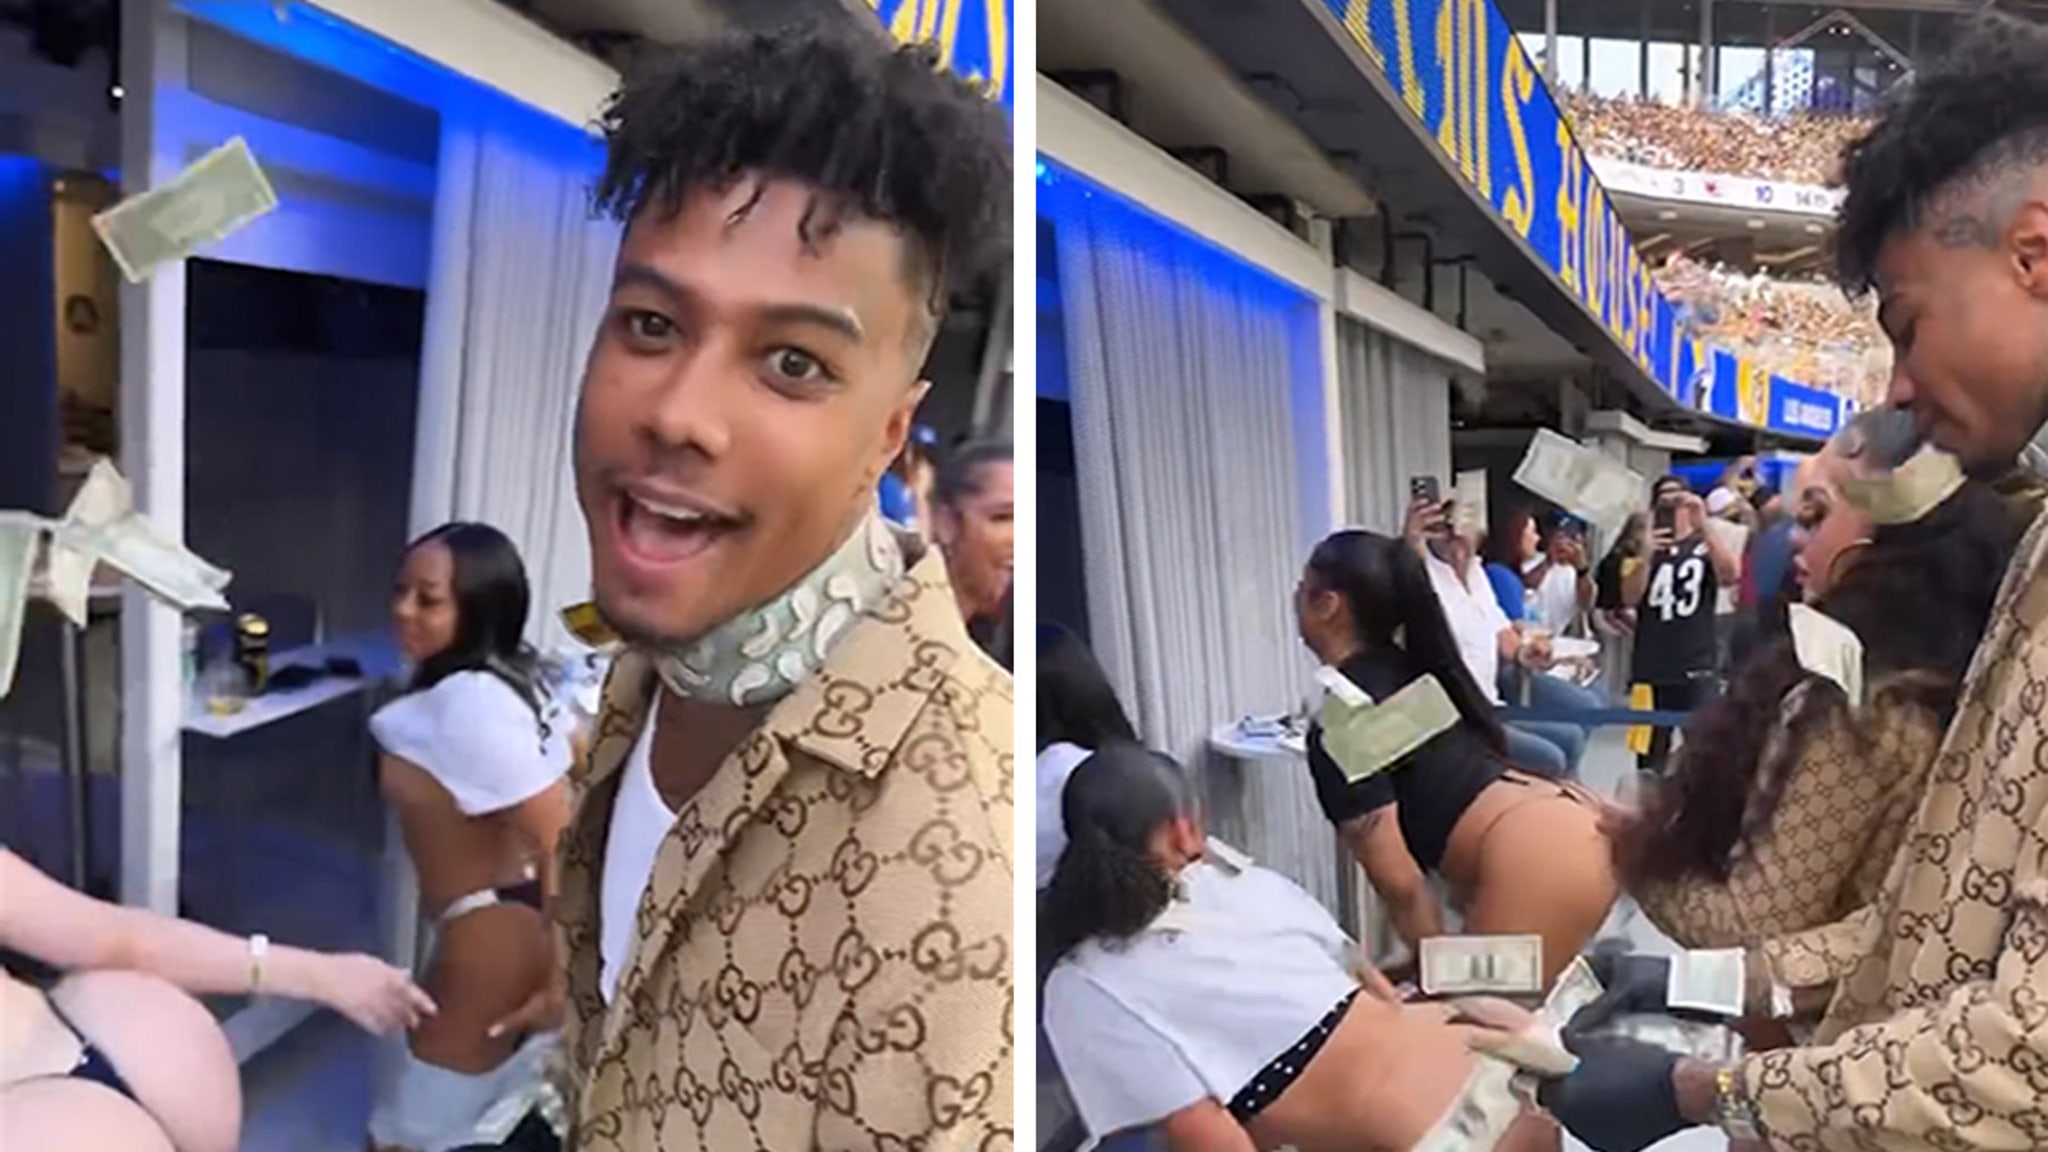 Blueface Throws Money on Strippers During Rams Game Inside SoFi Stadium